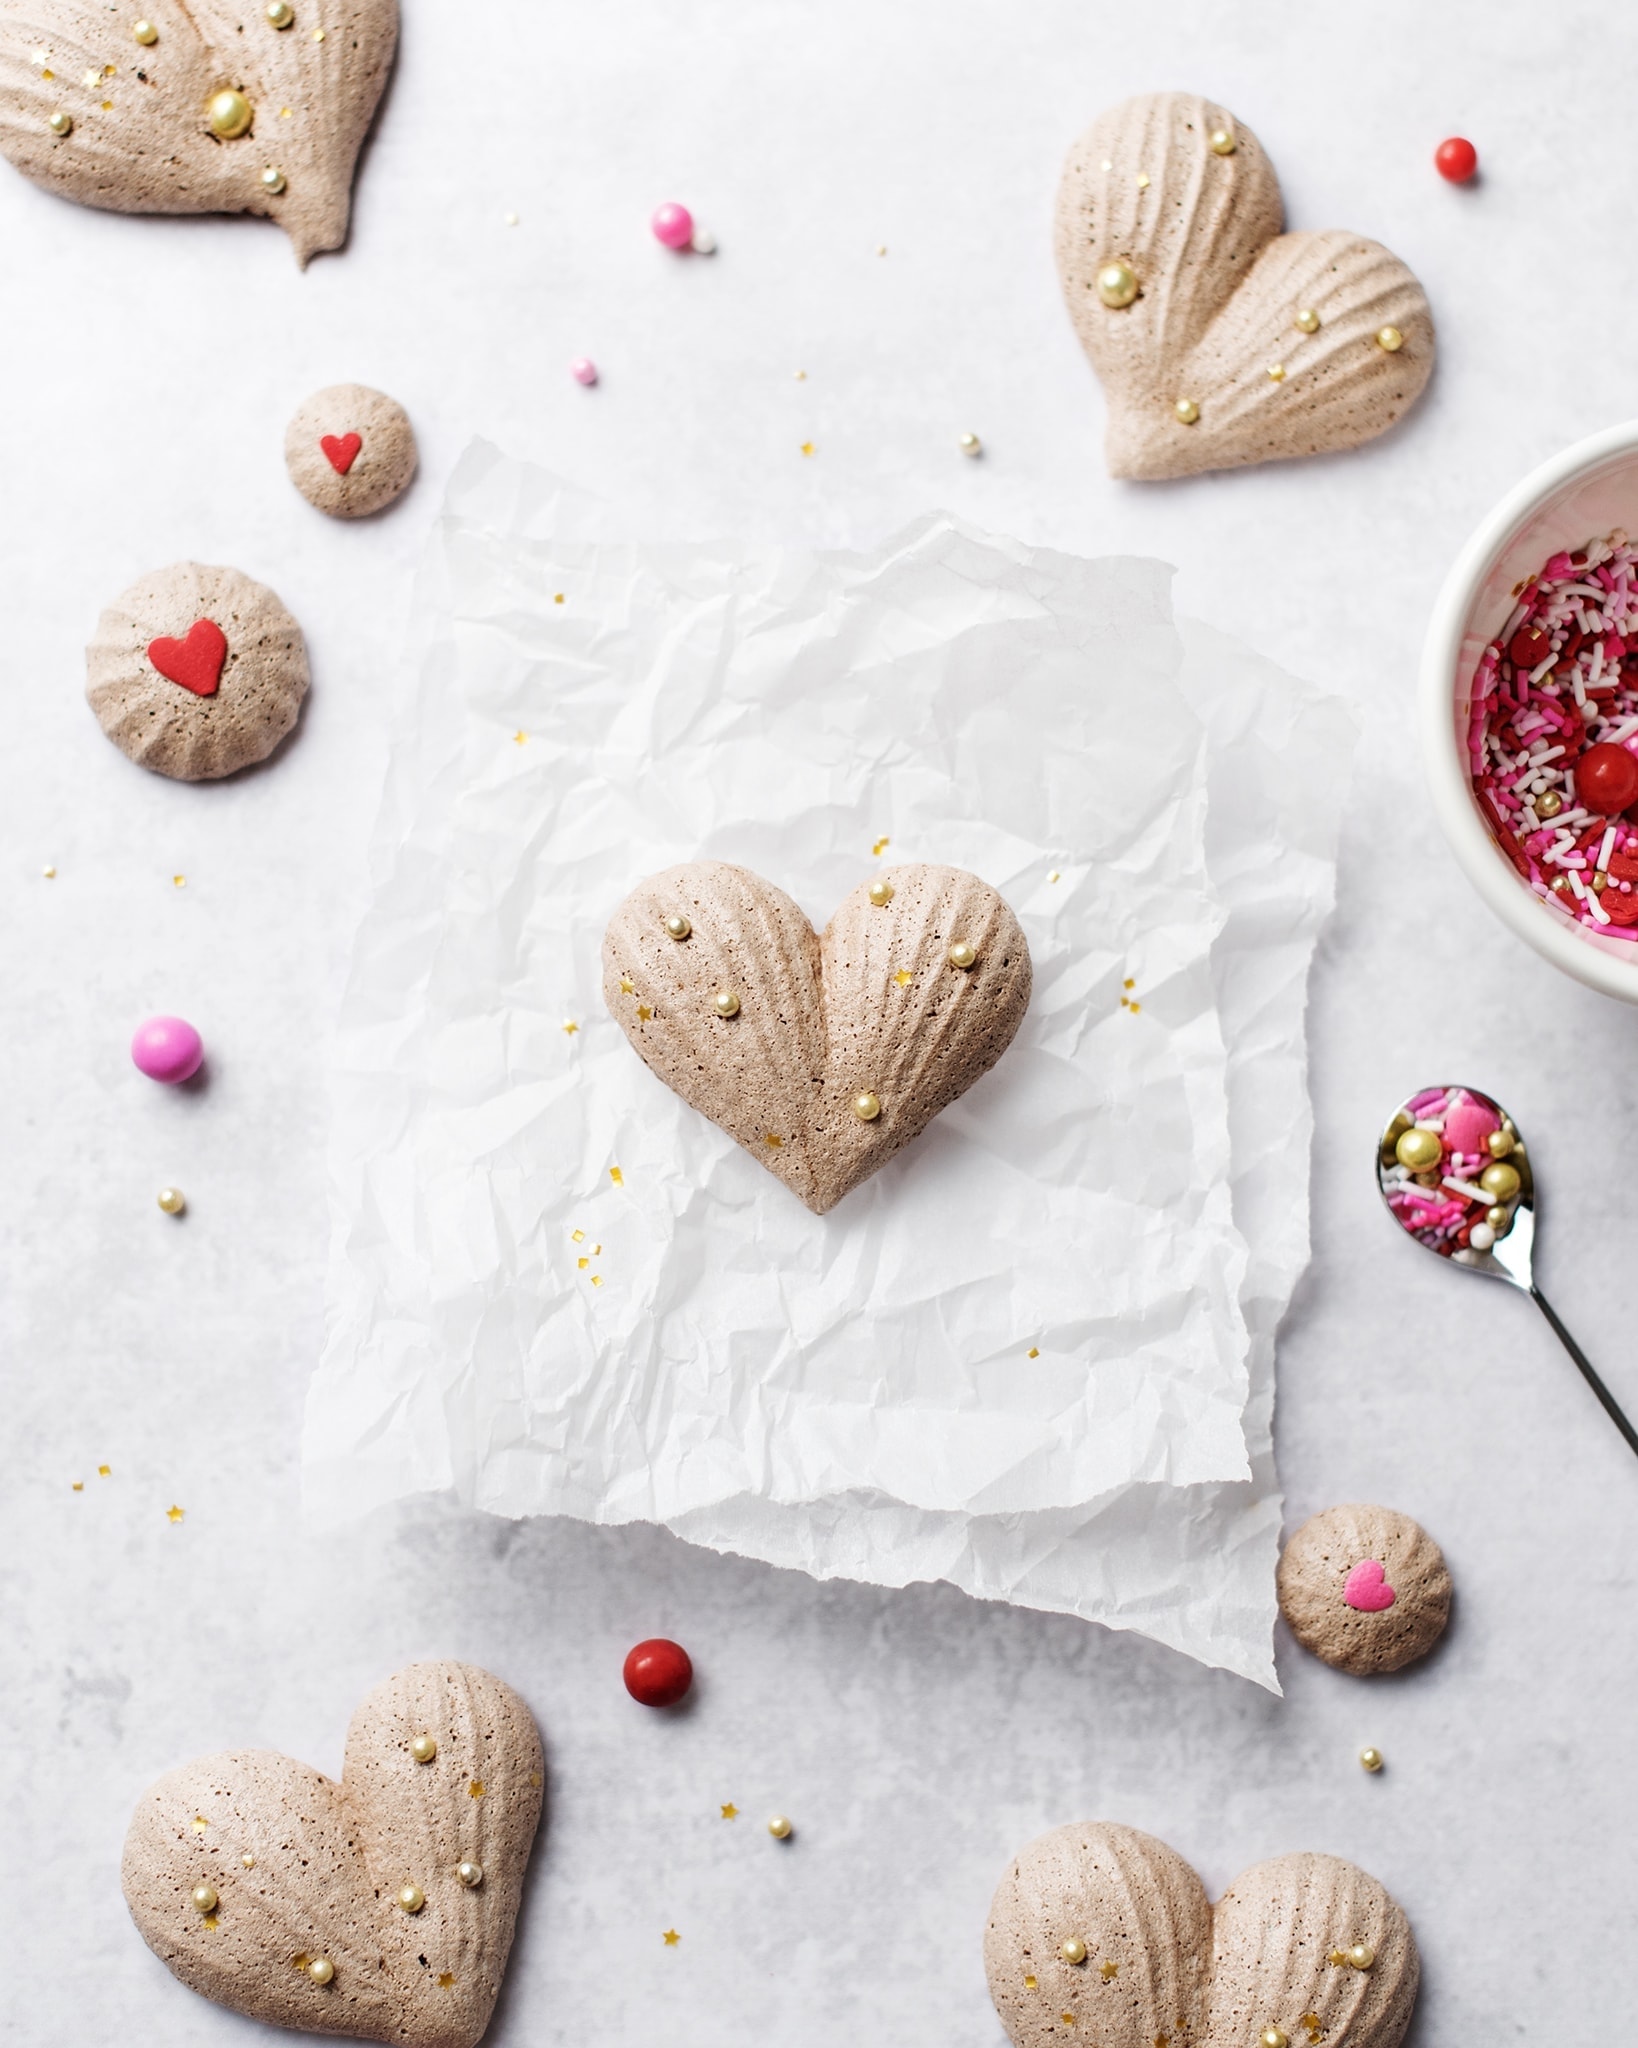 Heart-shaped chocolate meringues on parchment paper with a bowl of pink and red sprinkles